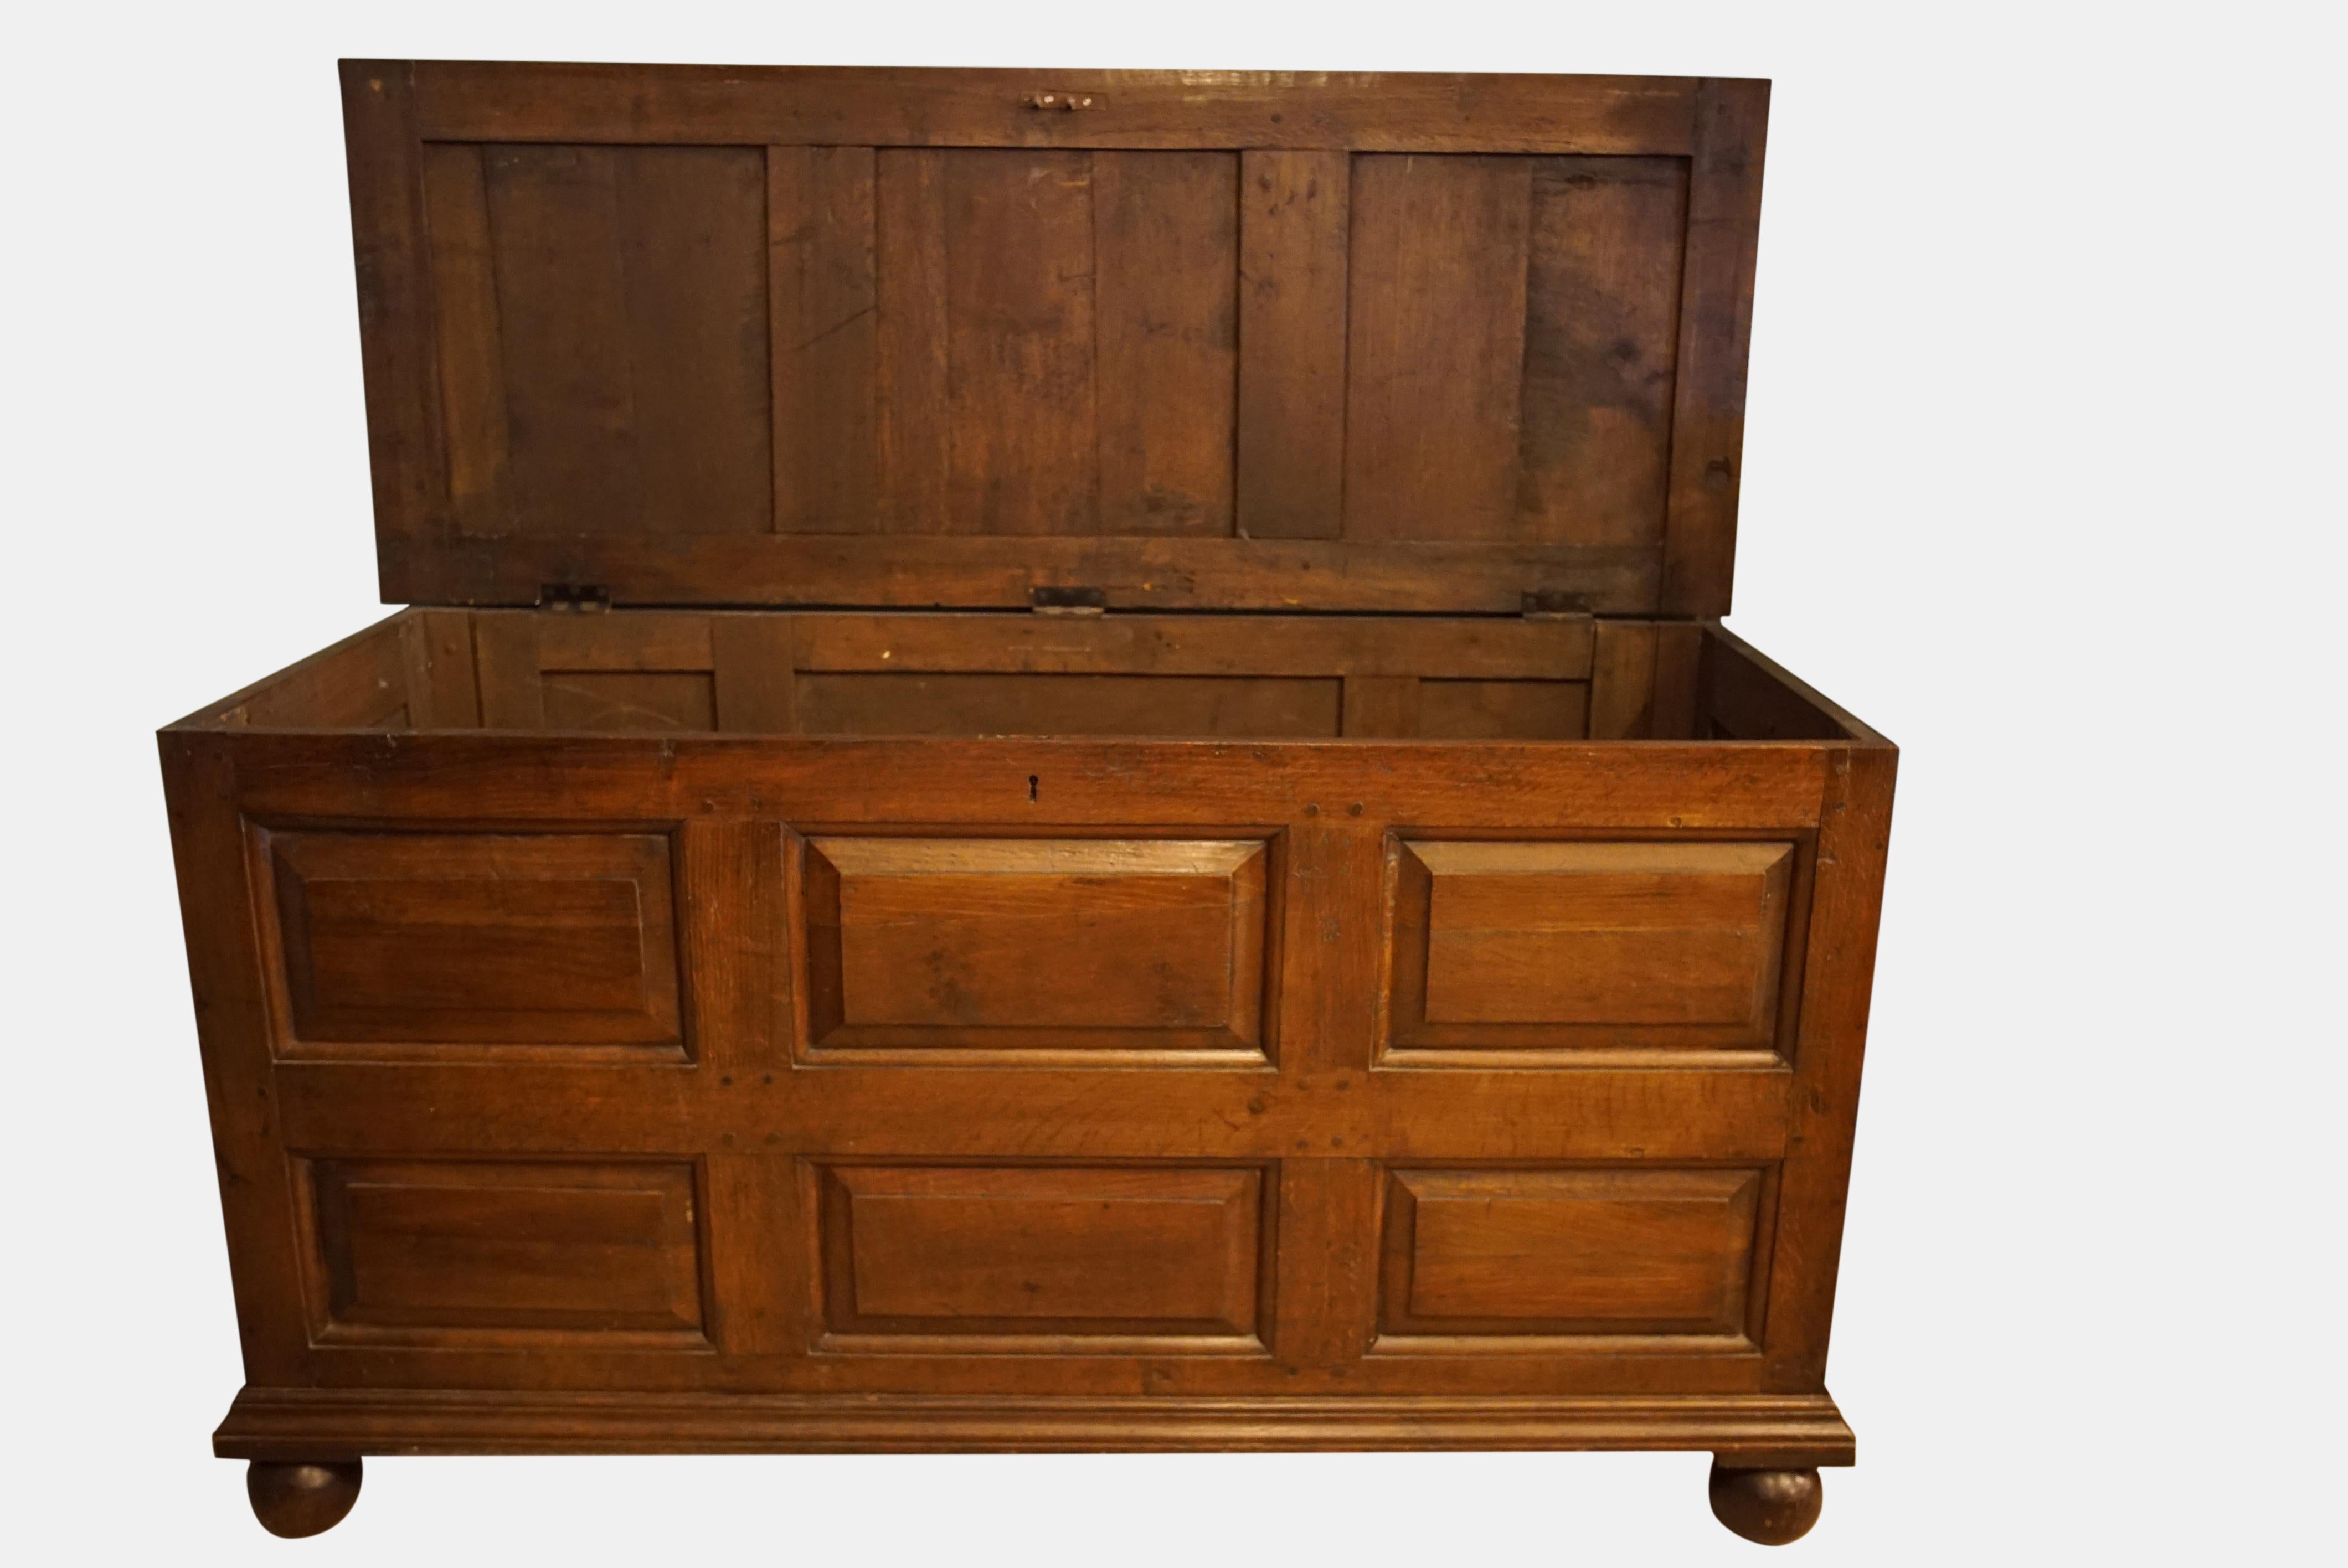 A large early 18th century oak coffer with three-panels to the top and six-panel front standing on bun feet.

circa 1740.